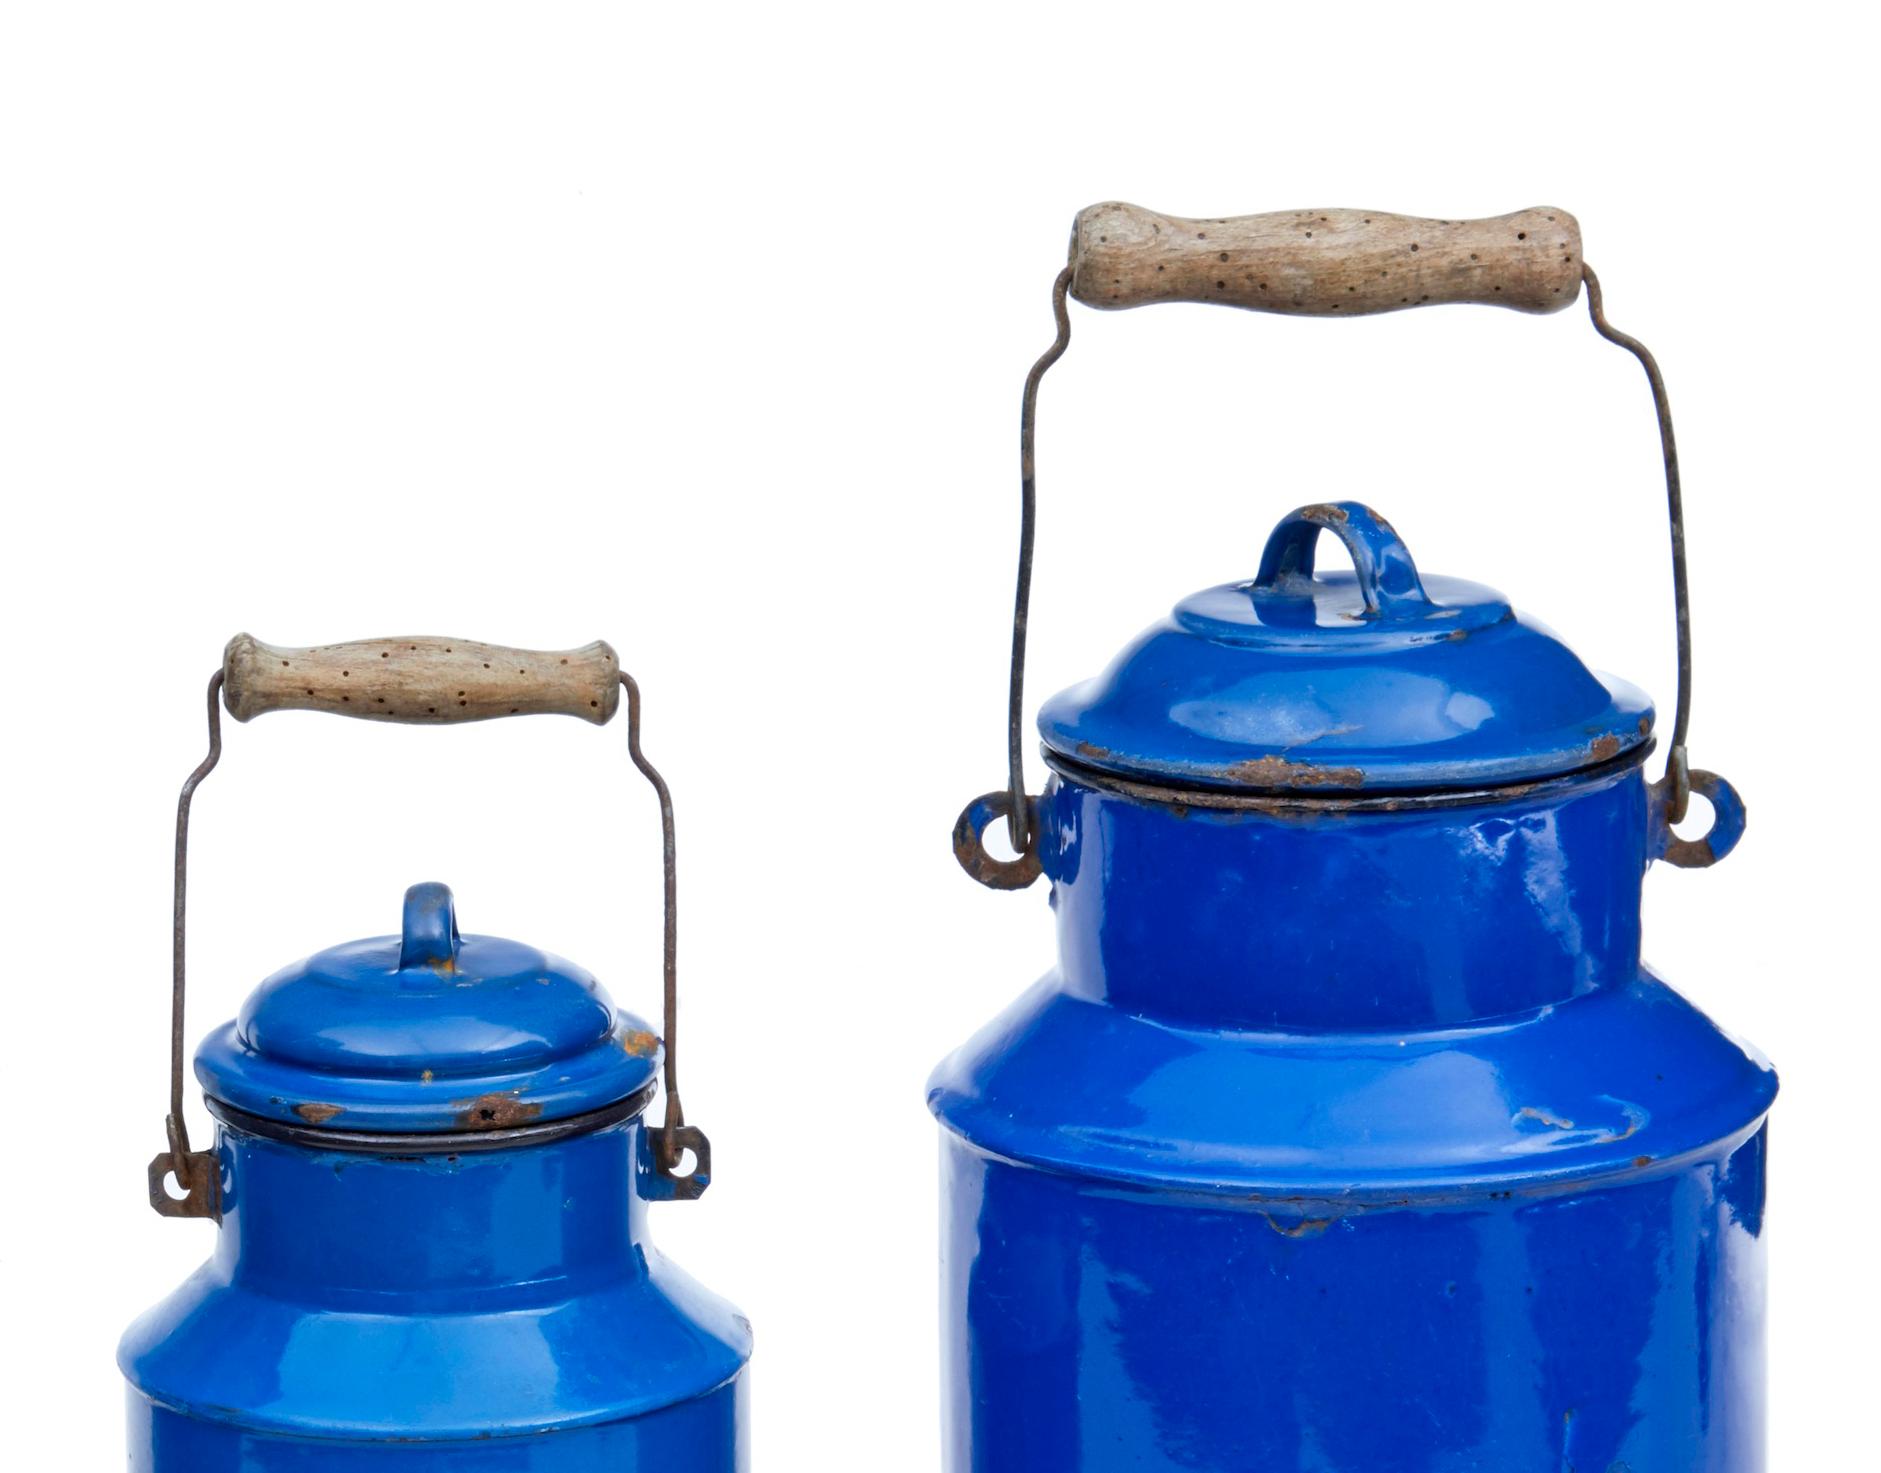 Rustic Collection of Four Pieces of Hungarian Enamelware by Bonyhad